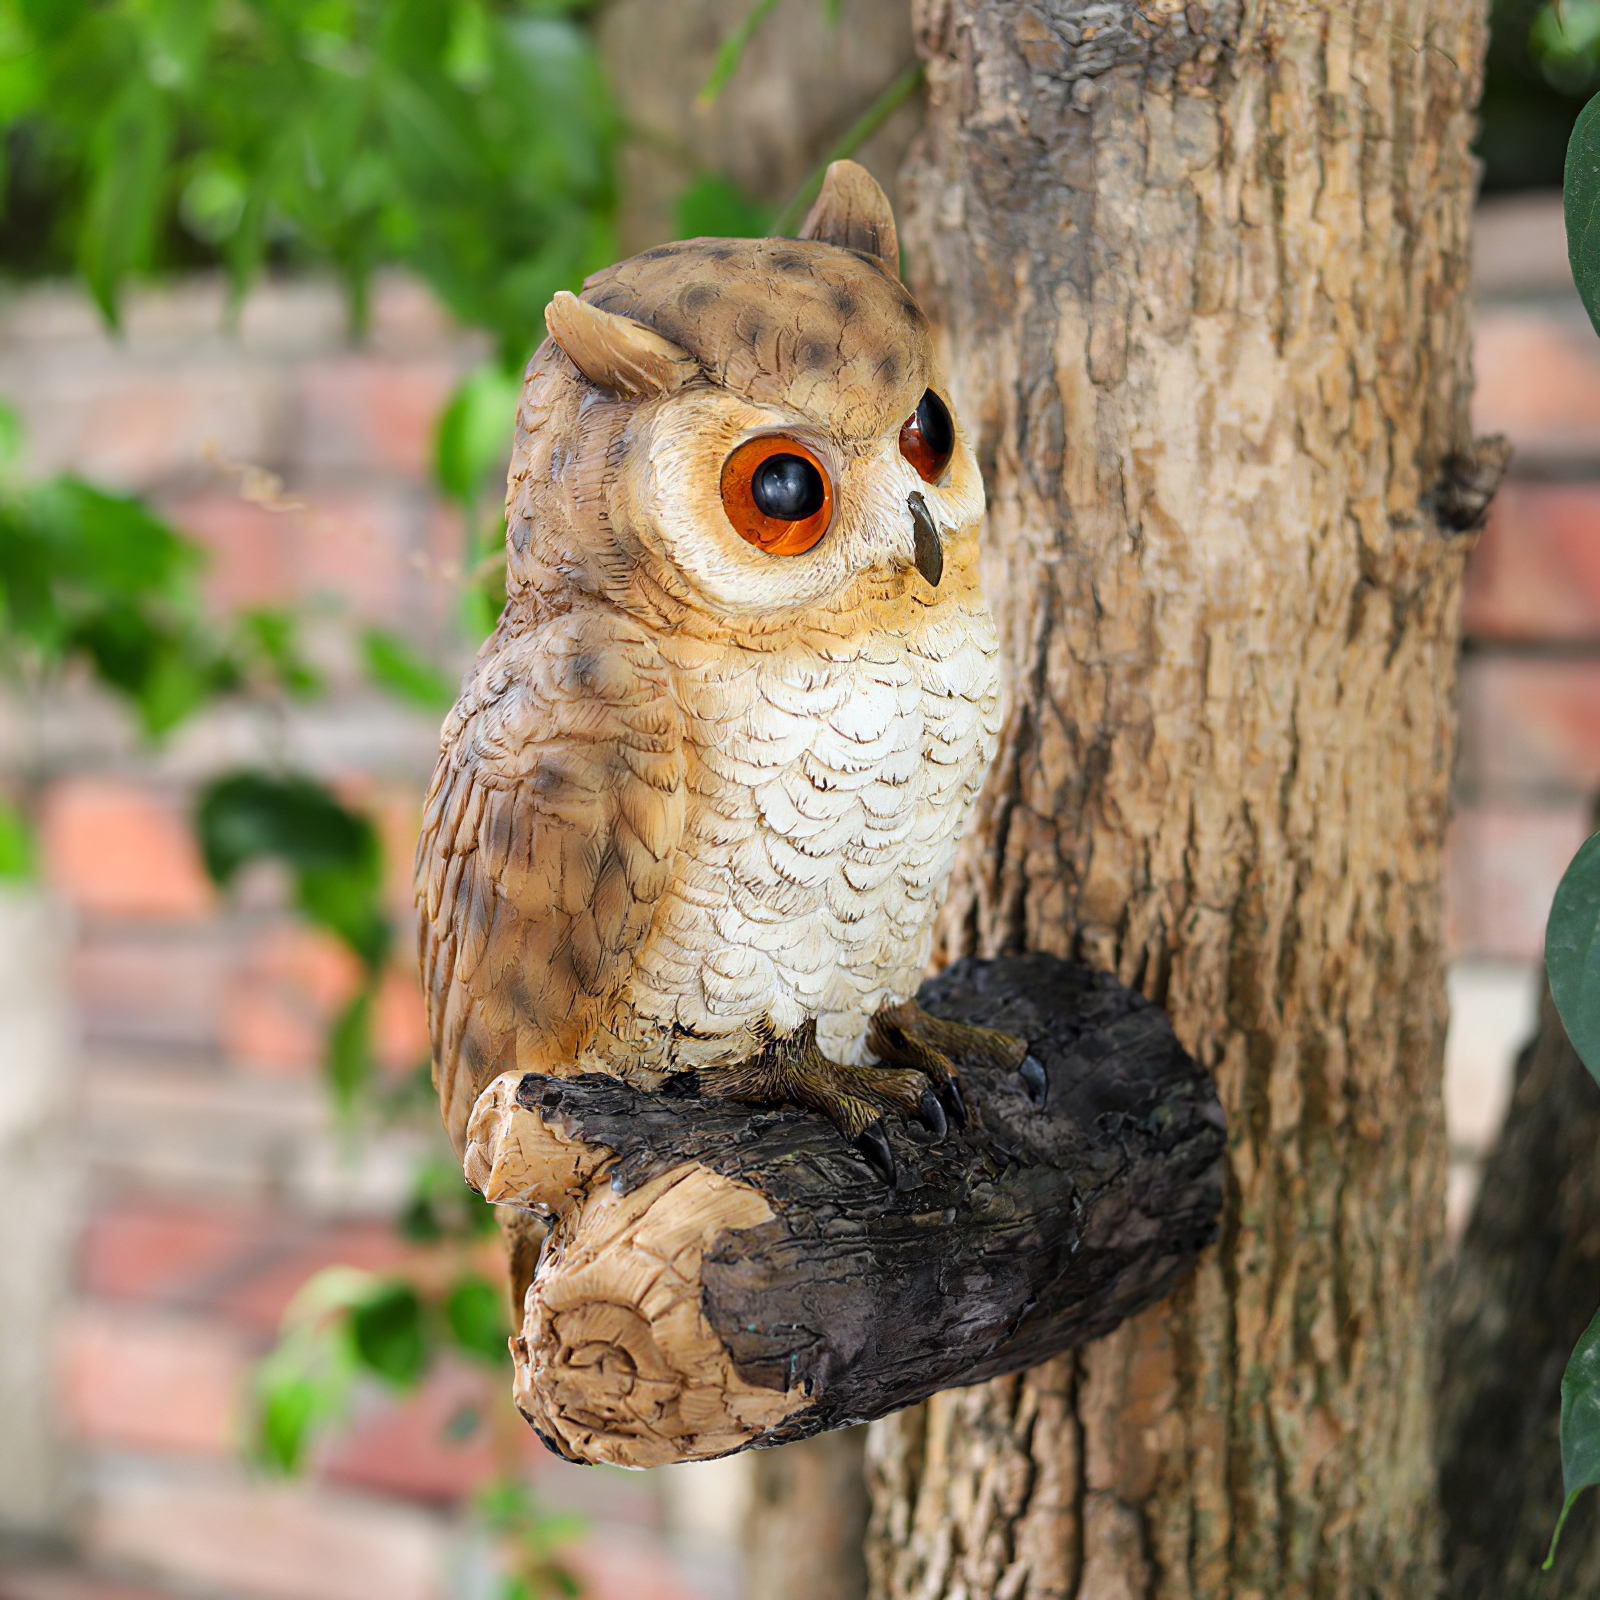 Toma Resin Owl Statue Realistic Owl Decoration Hanging Owl Sculpture Decorative Garden Owl Figurine for Outdoor Courtyard Balcony - image 5 of 10